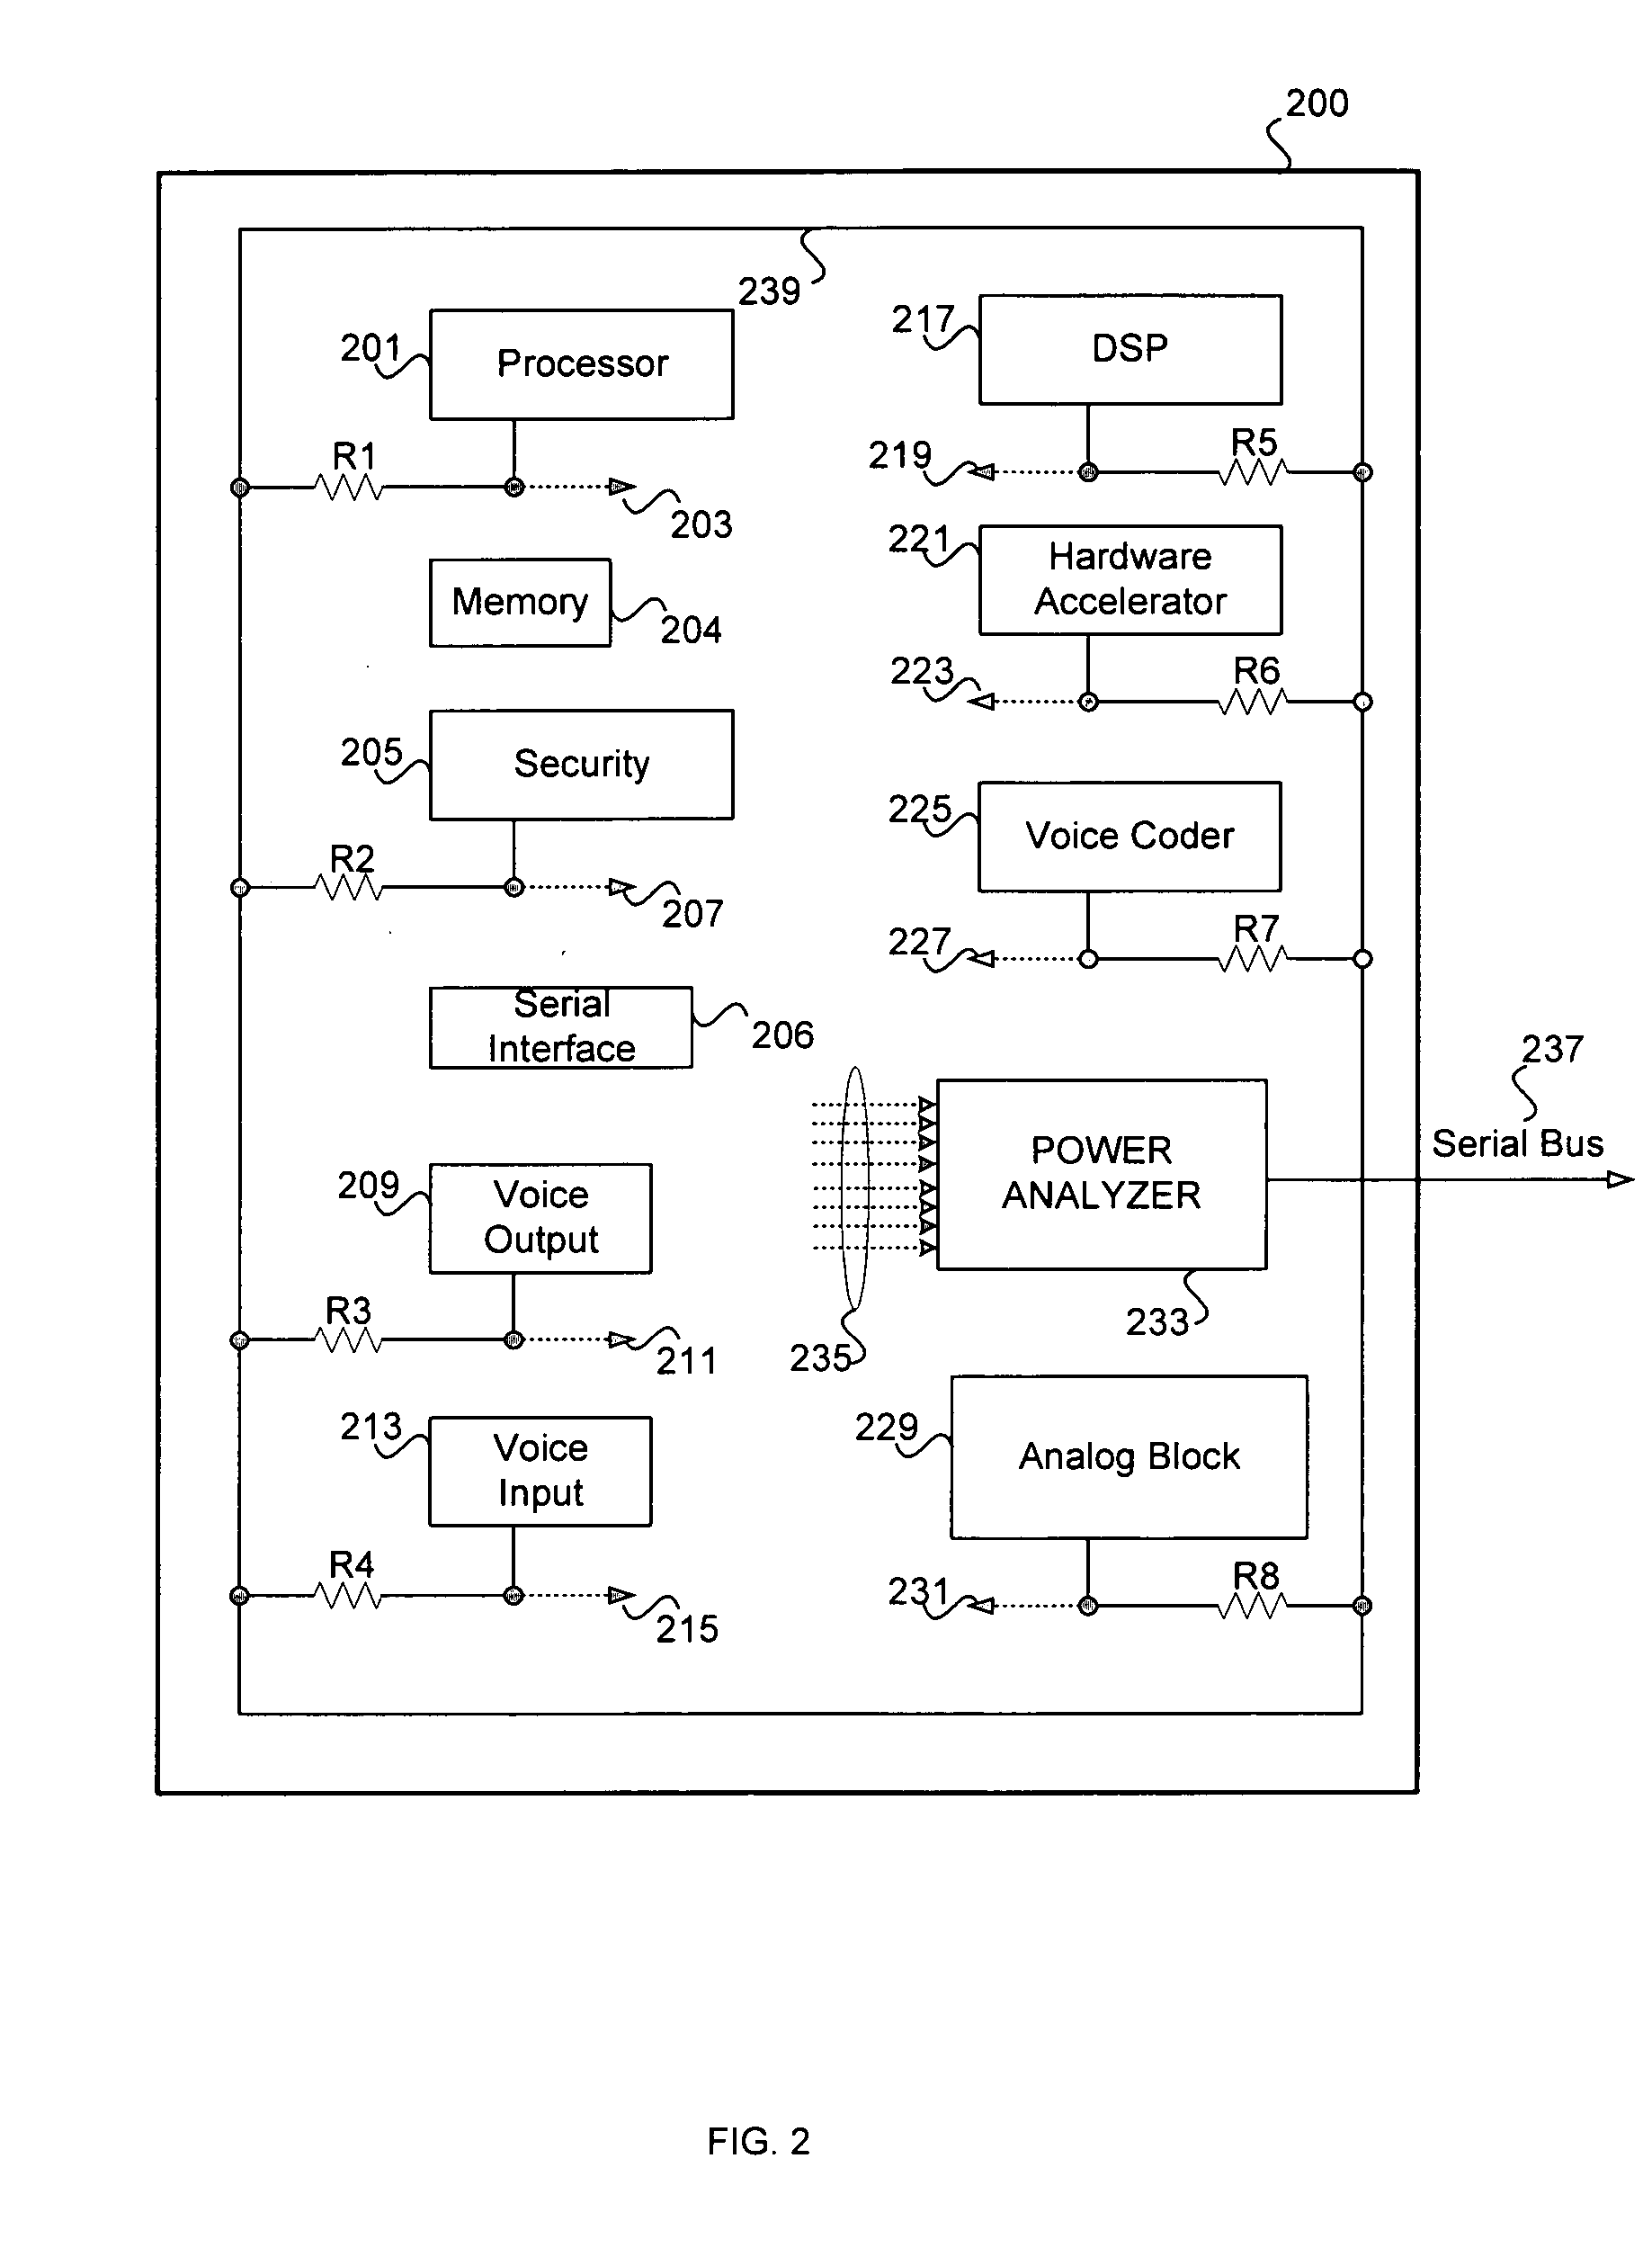 Method and system for monitoring module power status in a communication device